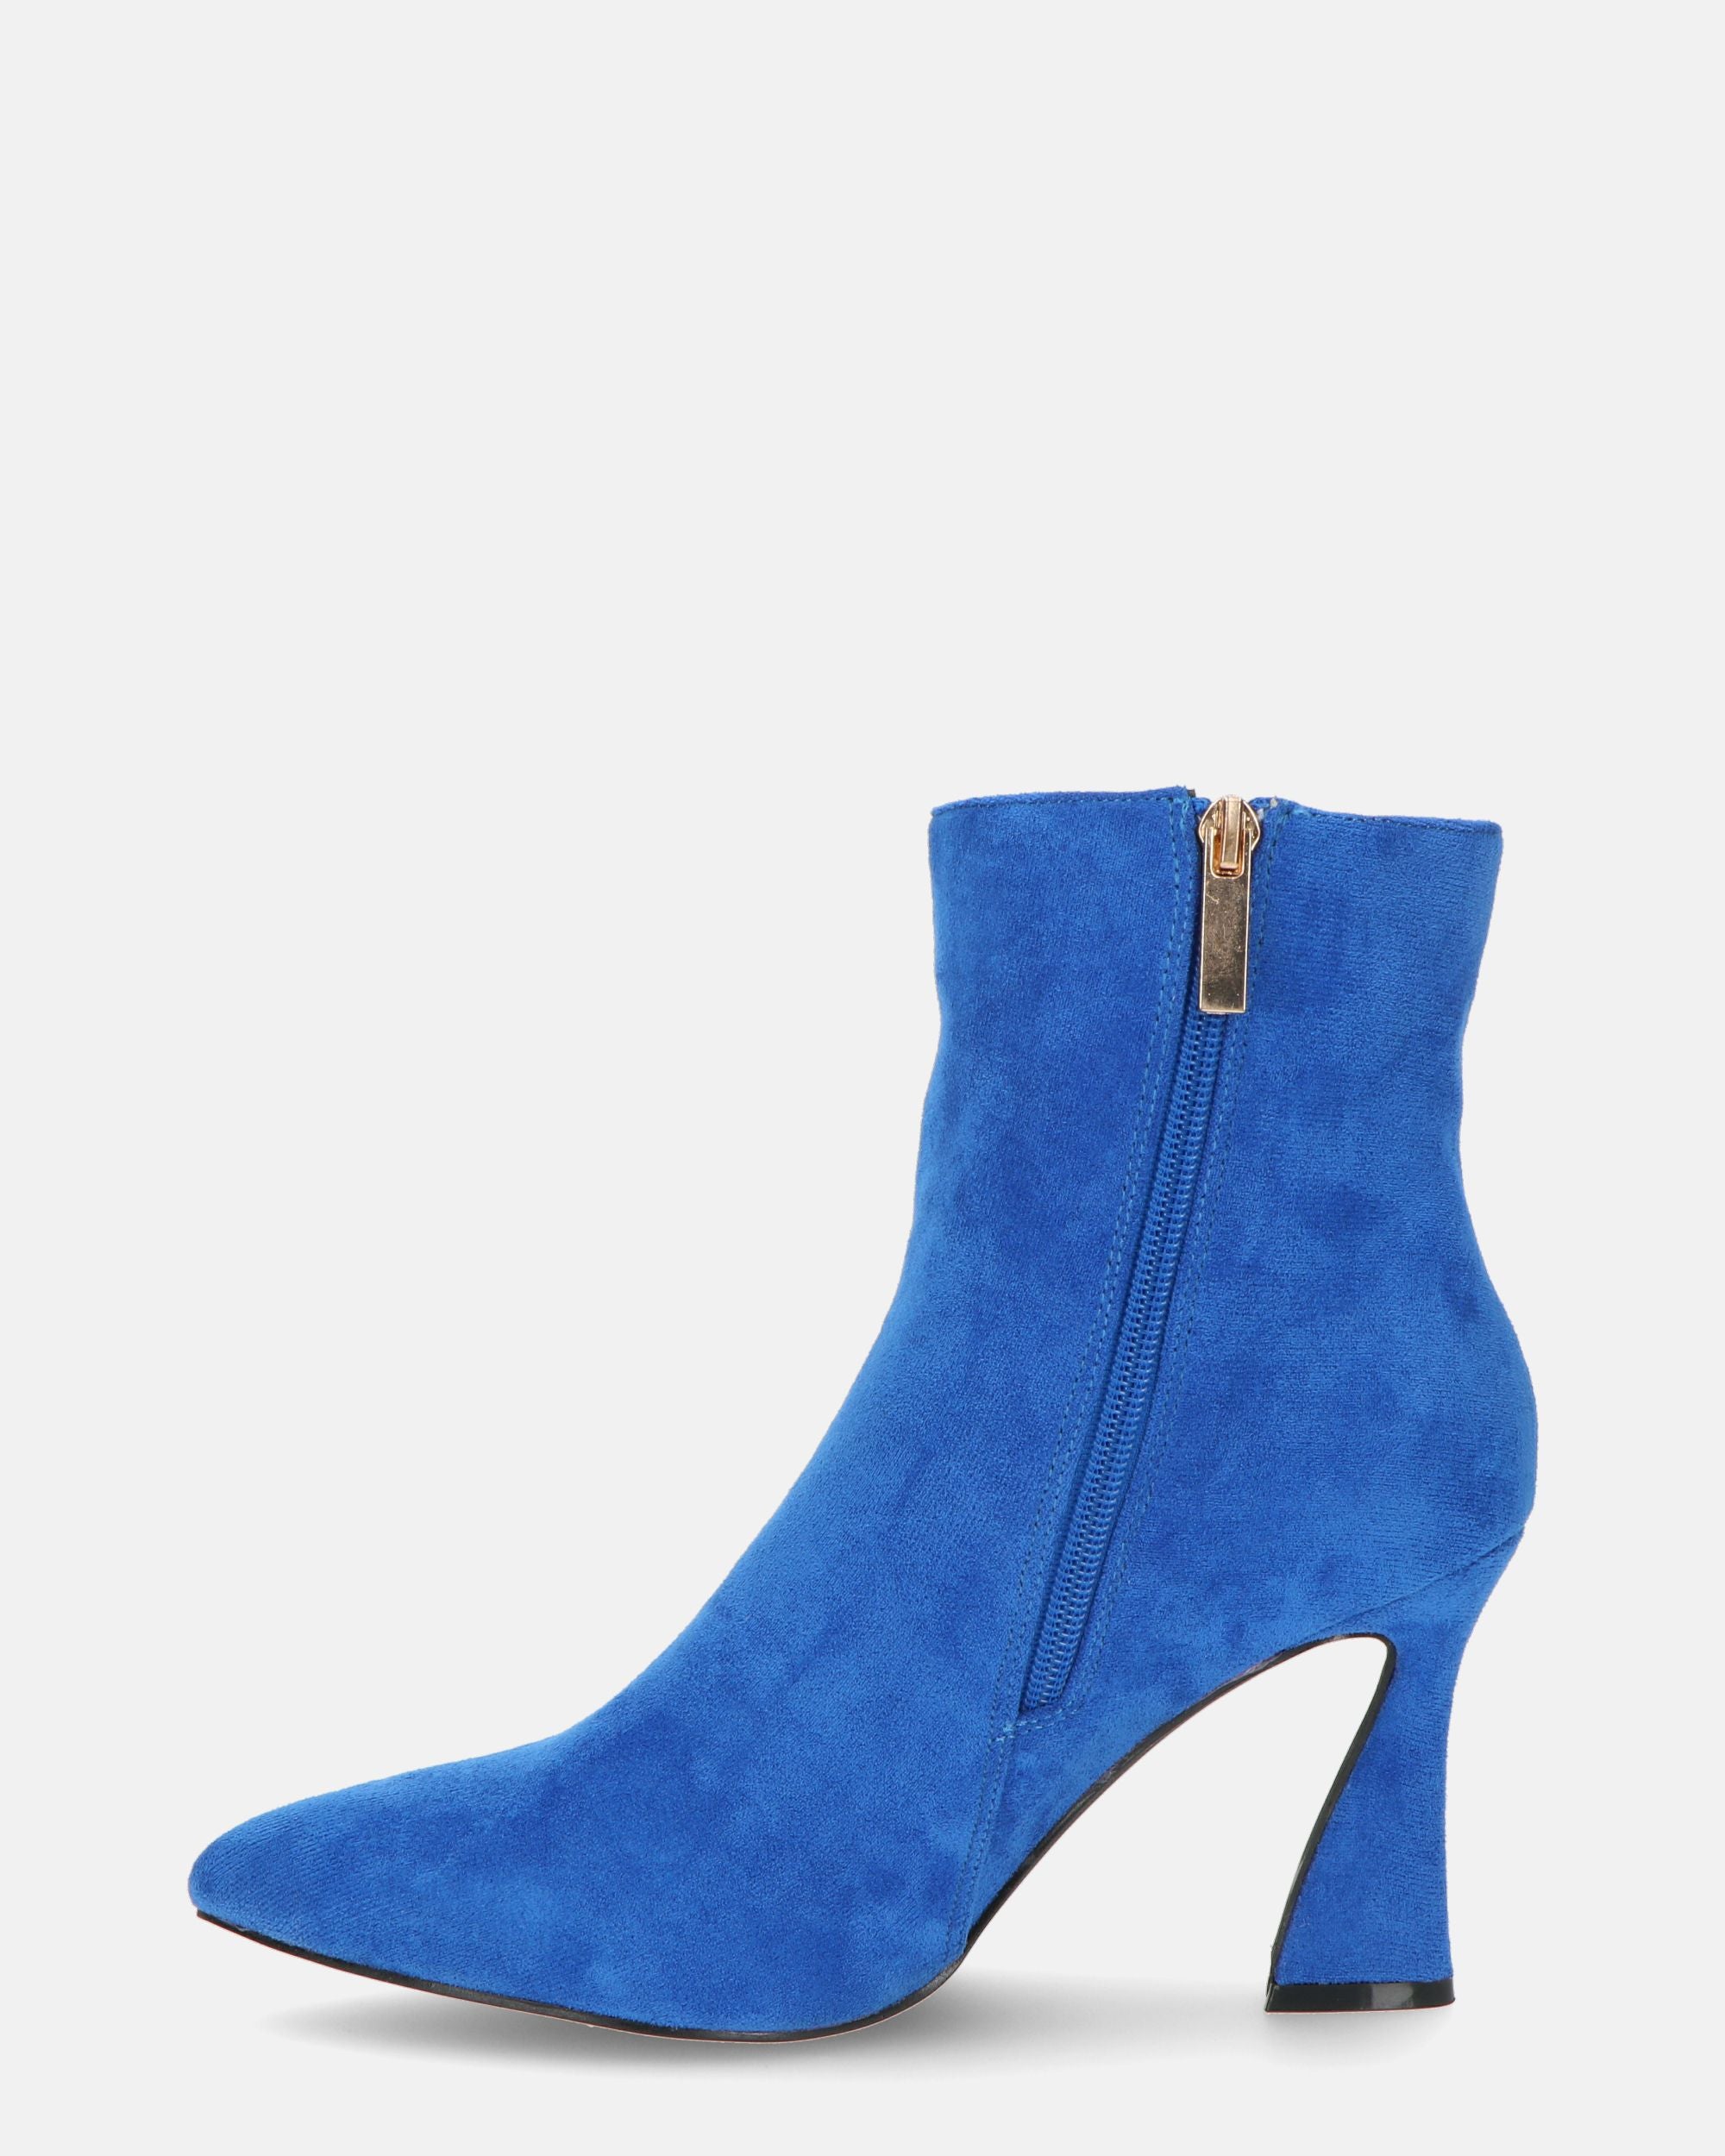 SMILLA - blue suede ankle boots with zip